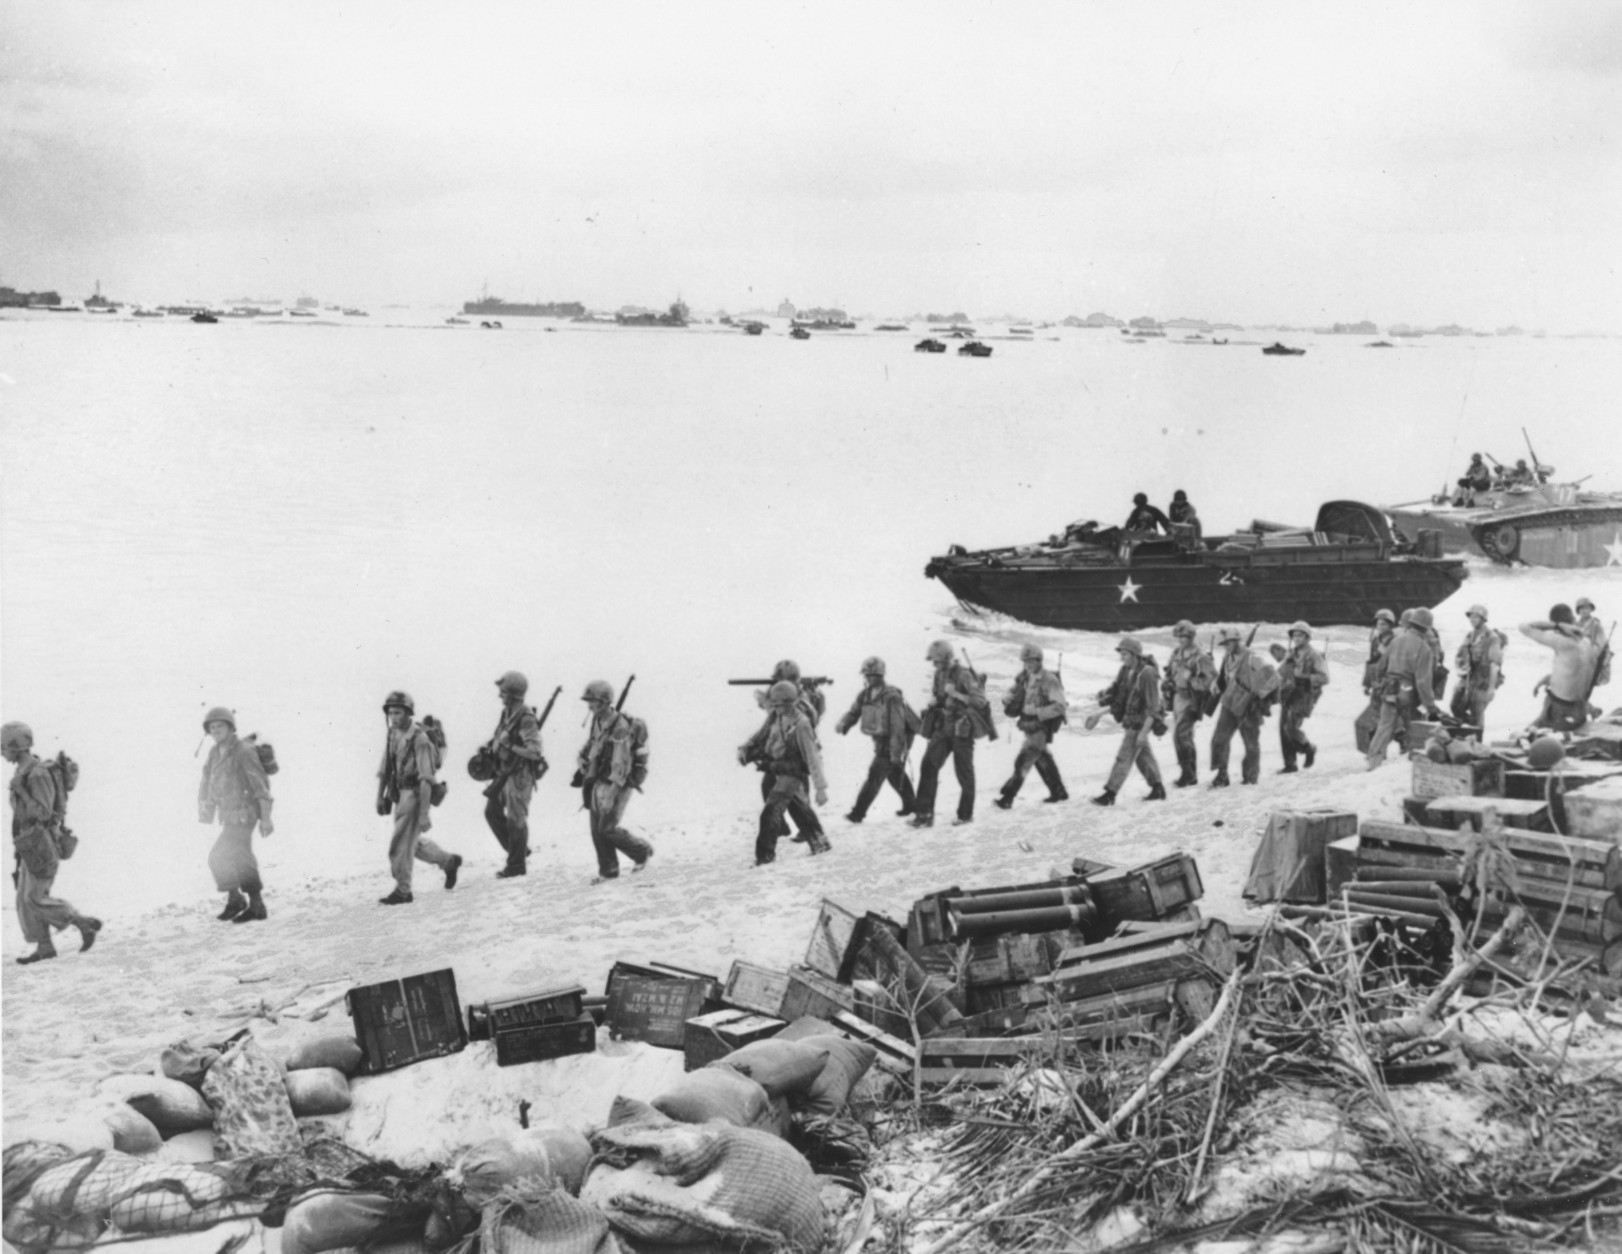 American troops march along a beach on Saipan in the Mariana Islands after debarking from amphibious tanks during invasion operations against Japanese forces in June 1944 during World War II.  Army supplies are brought ashore, foreground.  On the horizon are various ships that make up the invasion force.  (AP Photo)